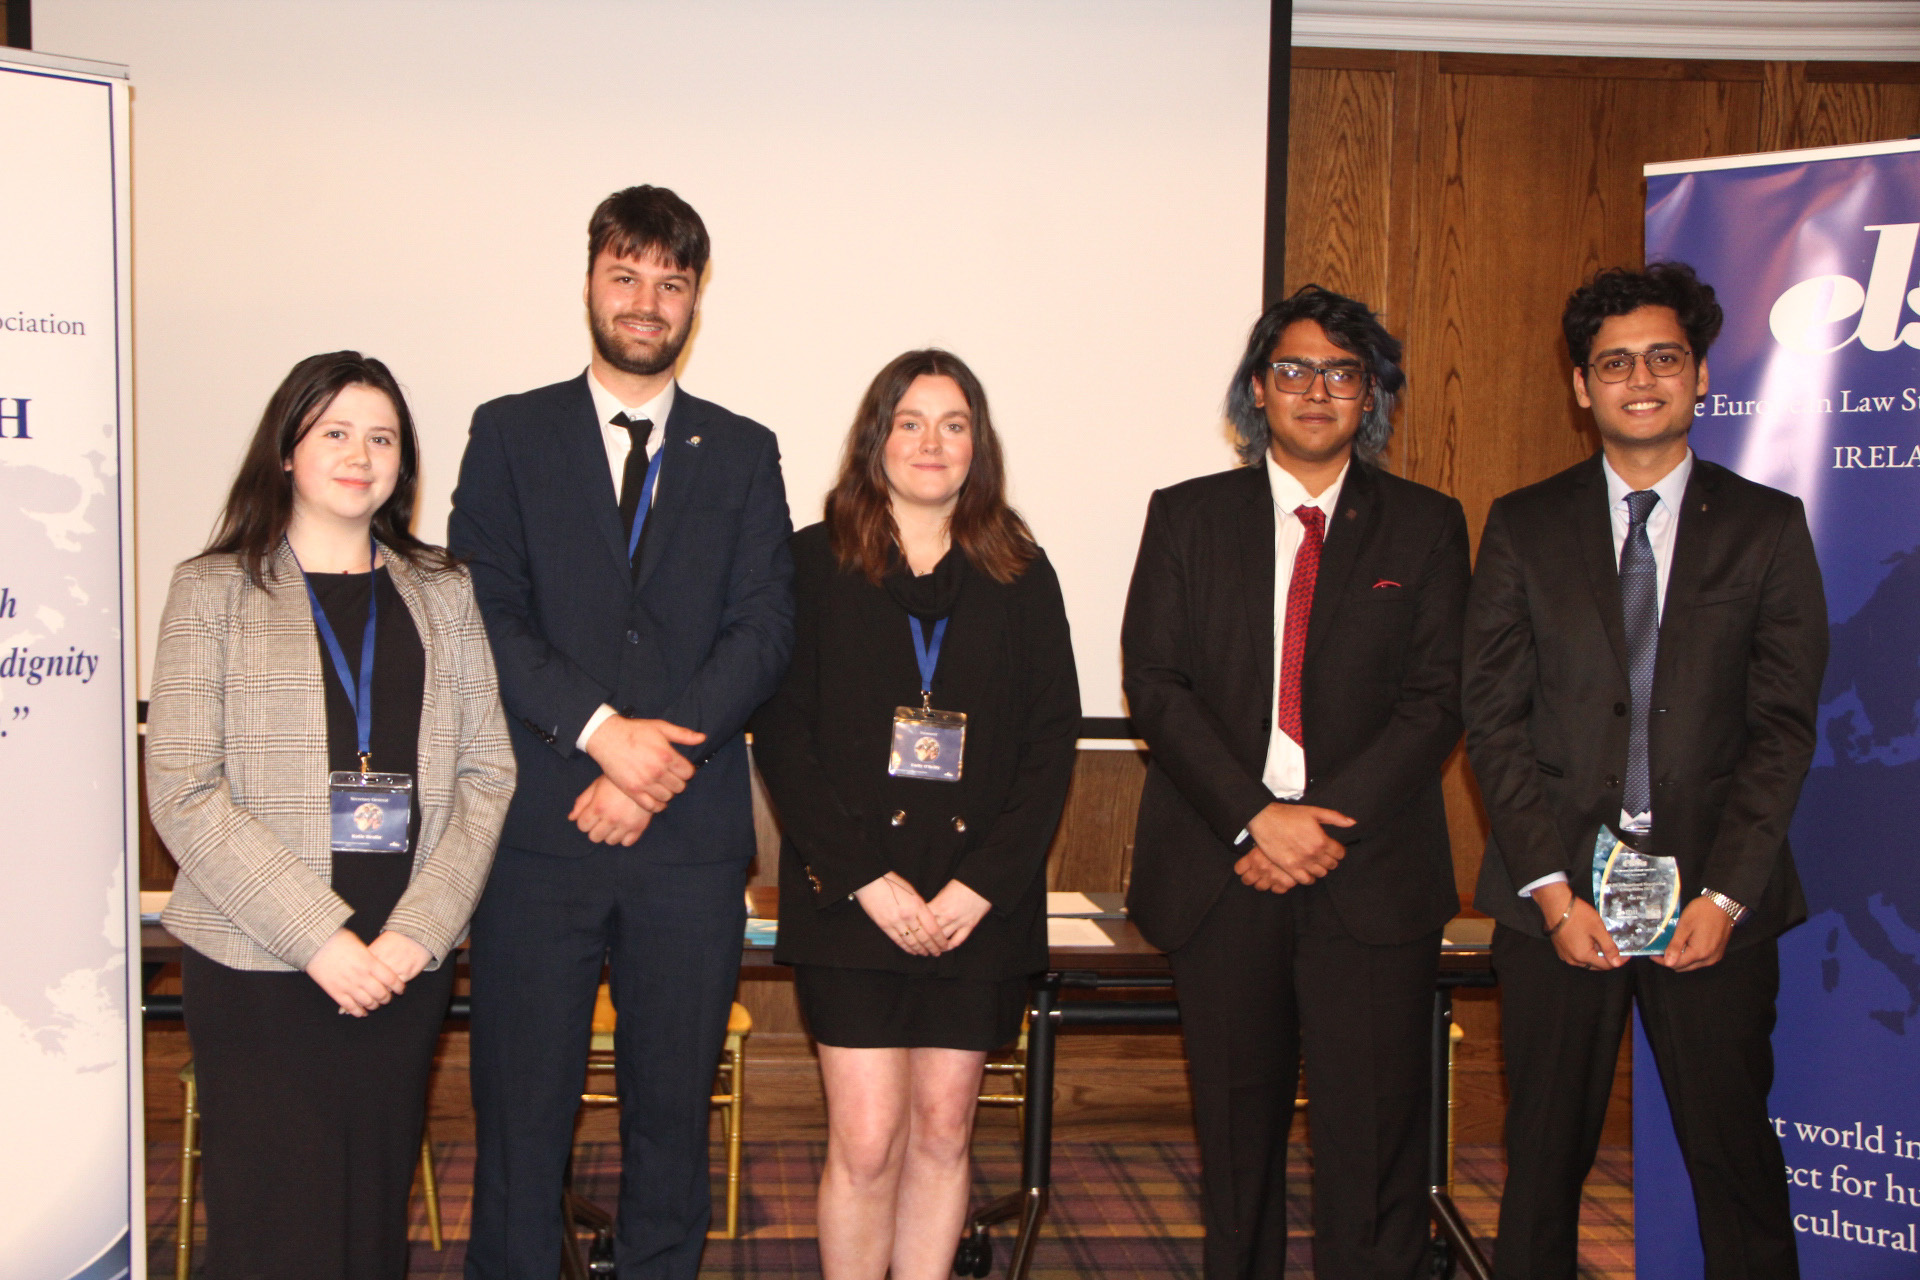 Indian students win International Negotiation Competition at Maynooth